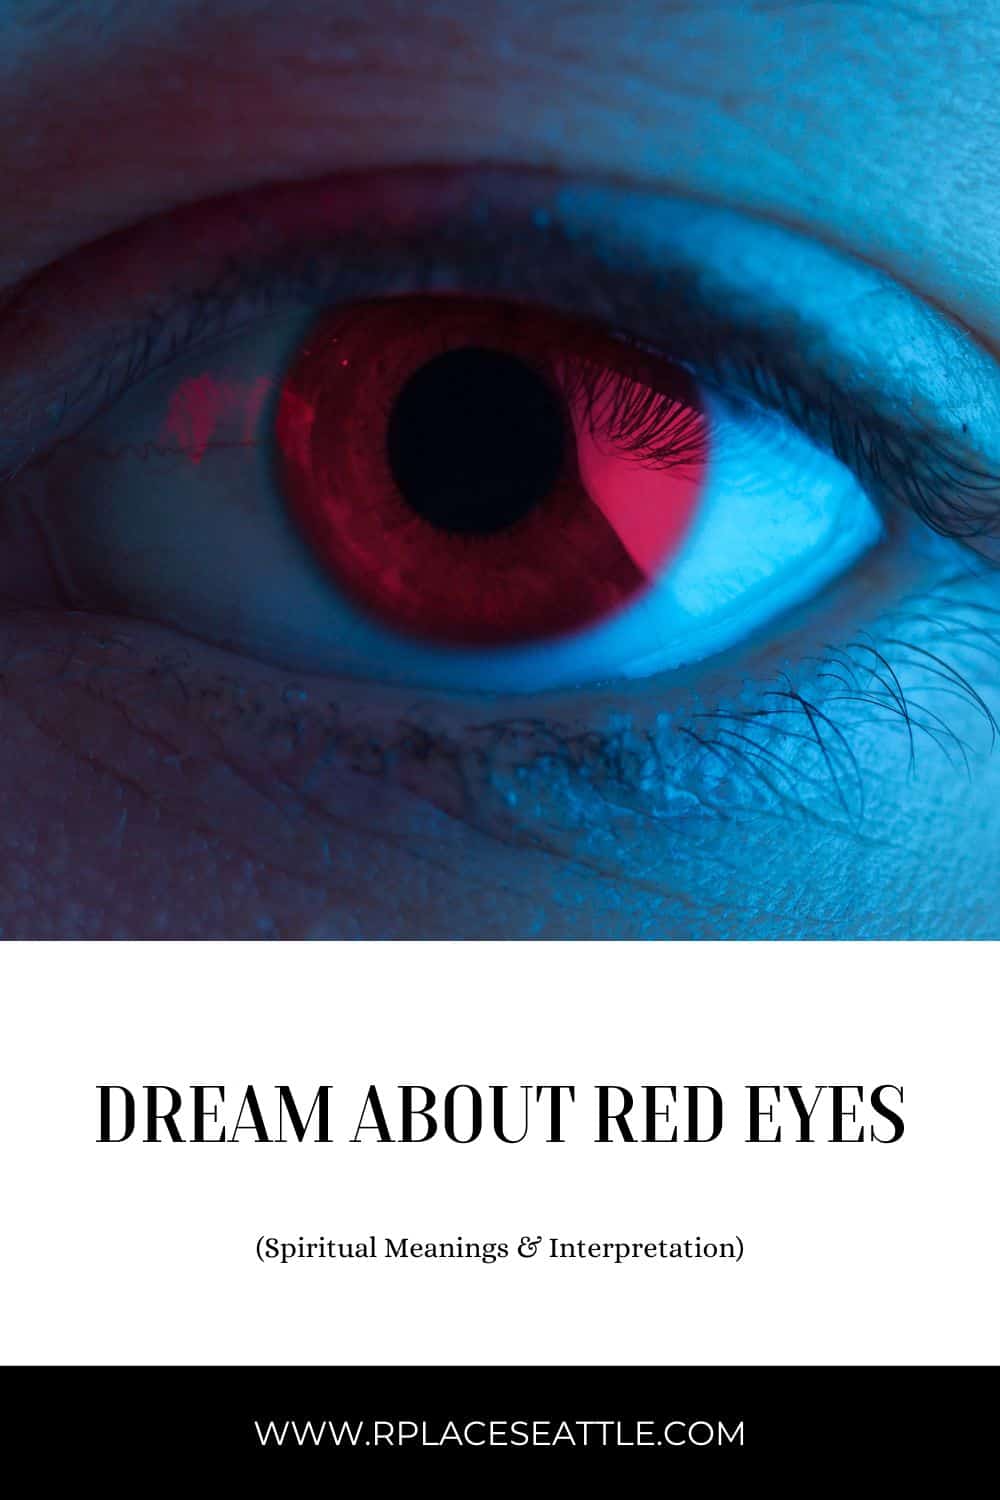 dream about red eyes (spiritual meanings & interpretation)